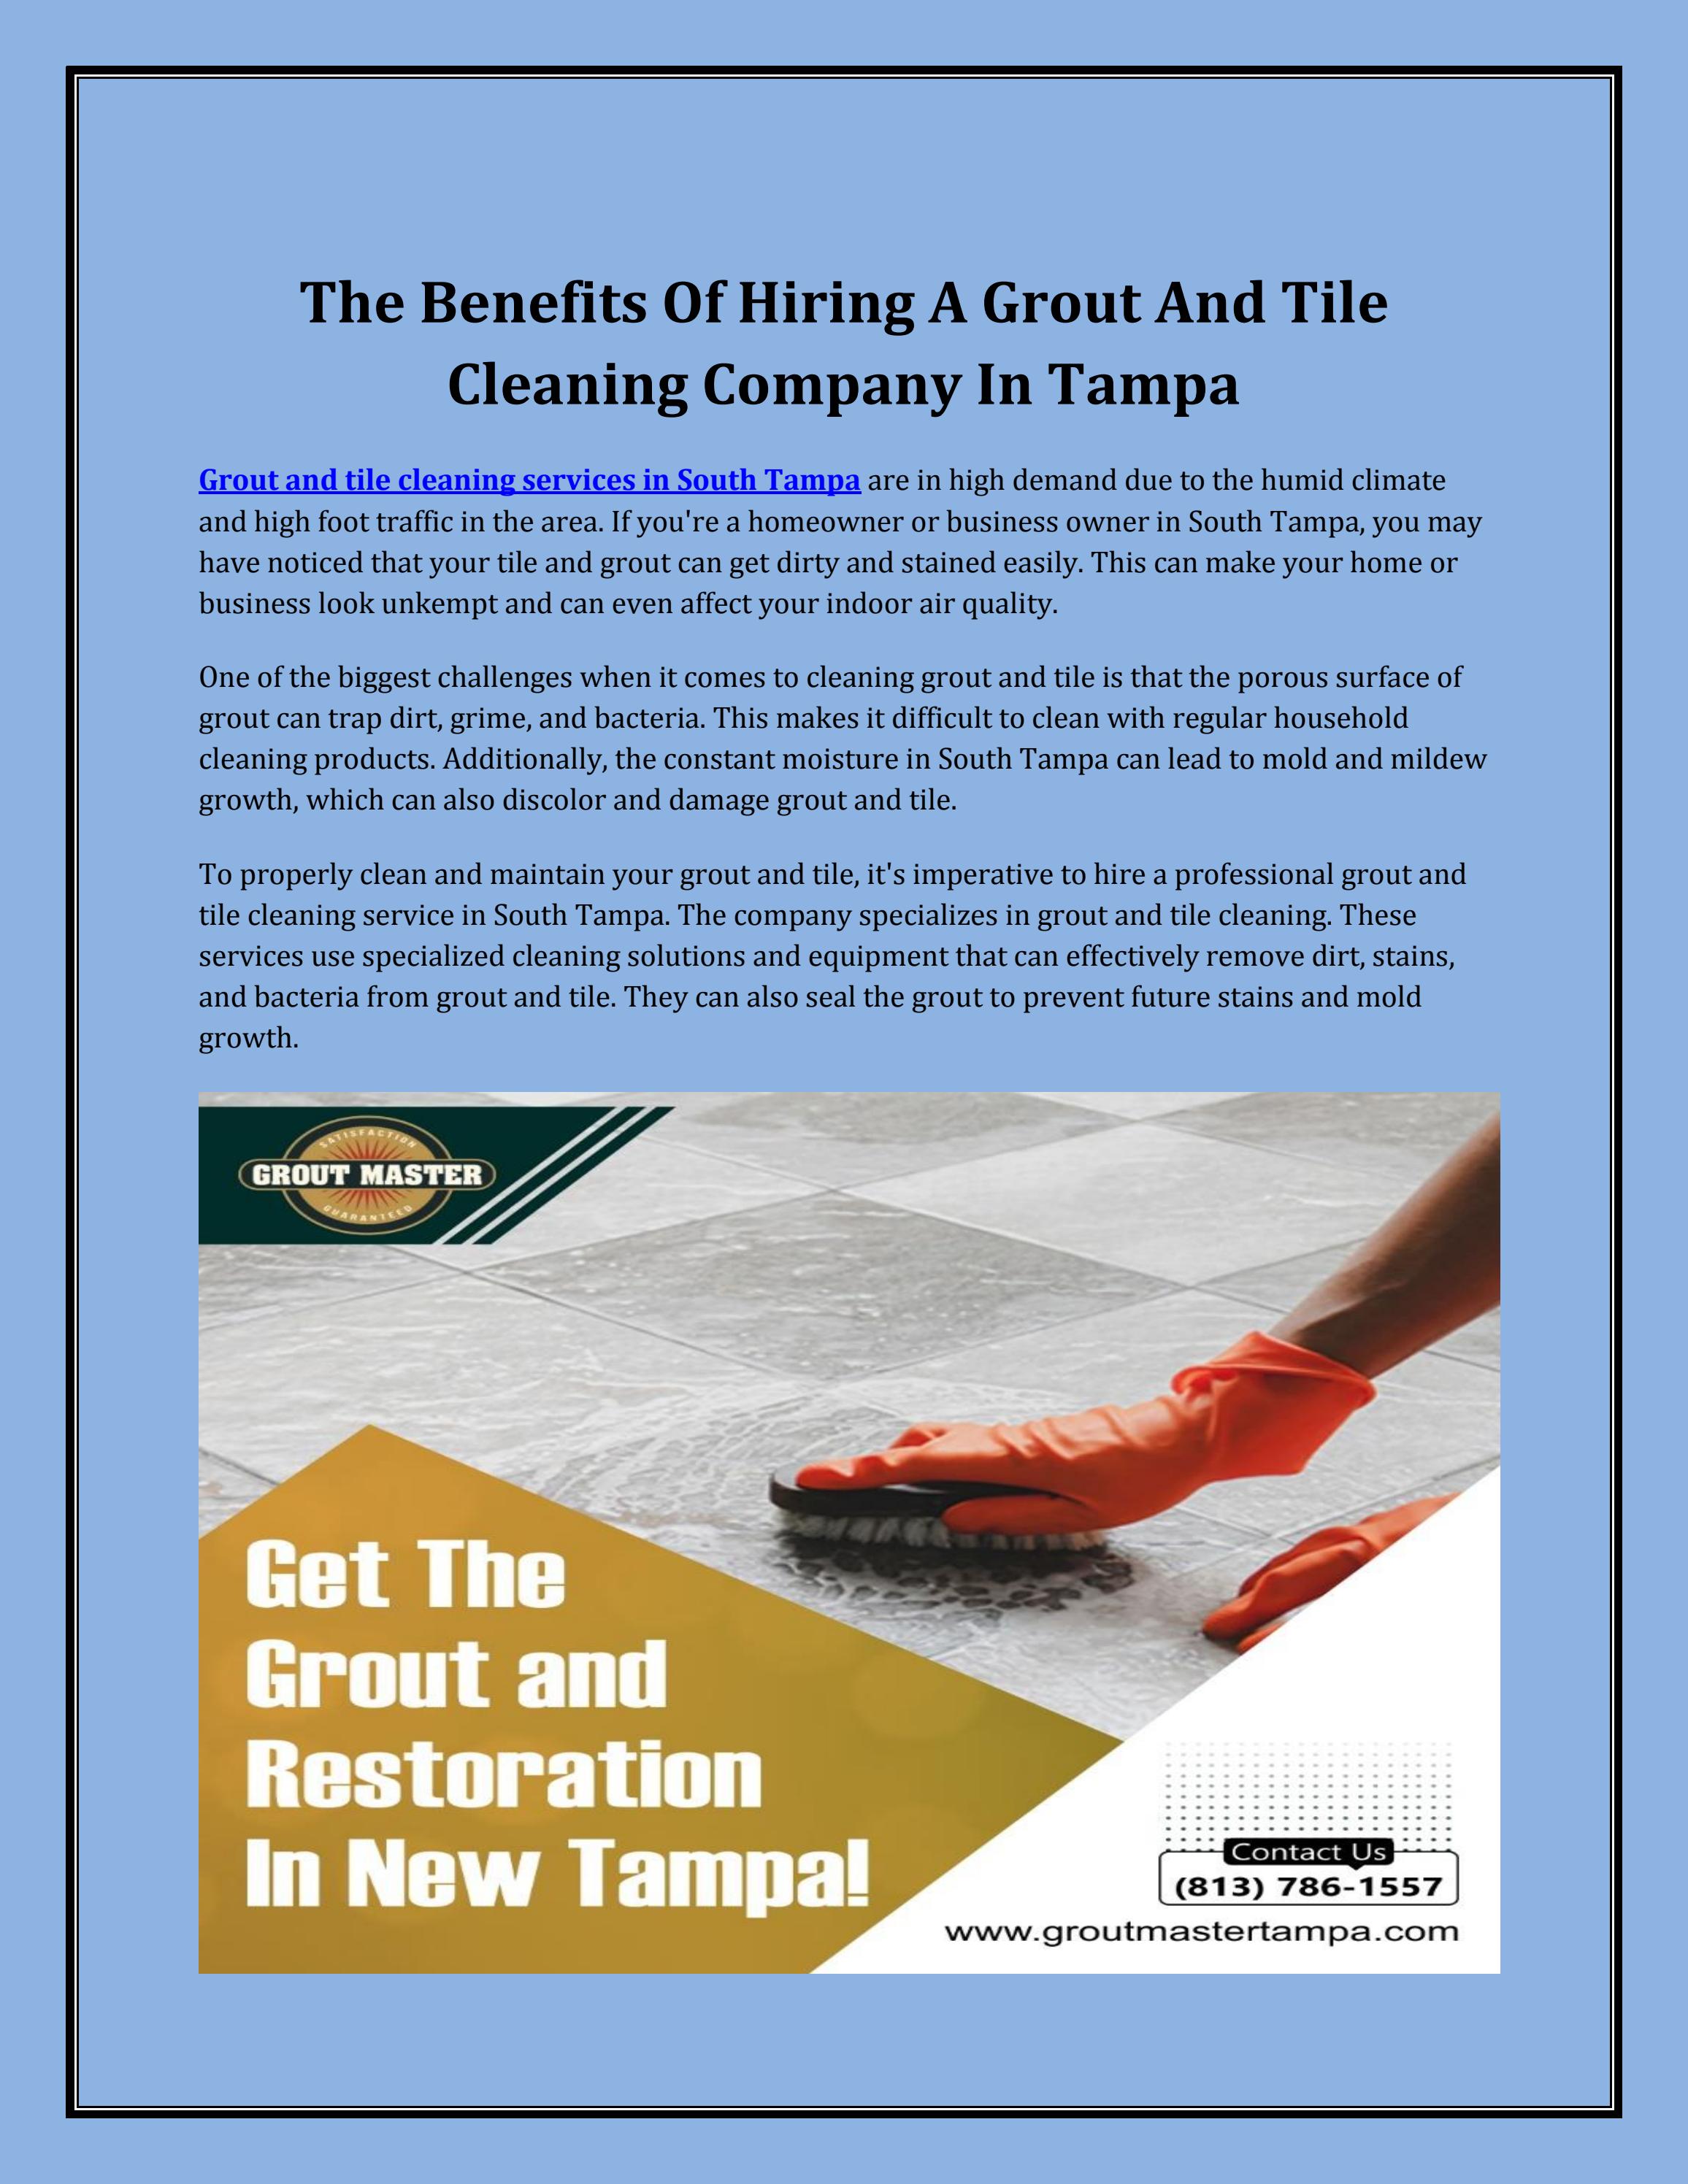 The Benefits Of Hiring A Grout And Tile Cleaning Company In Tampa